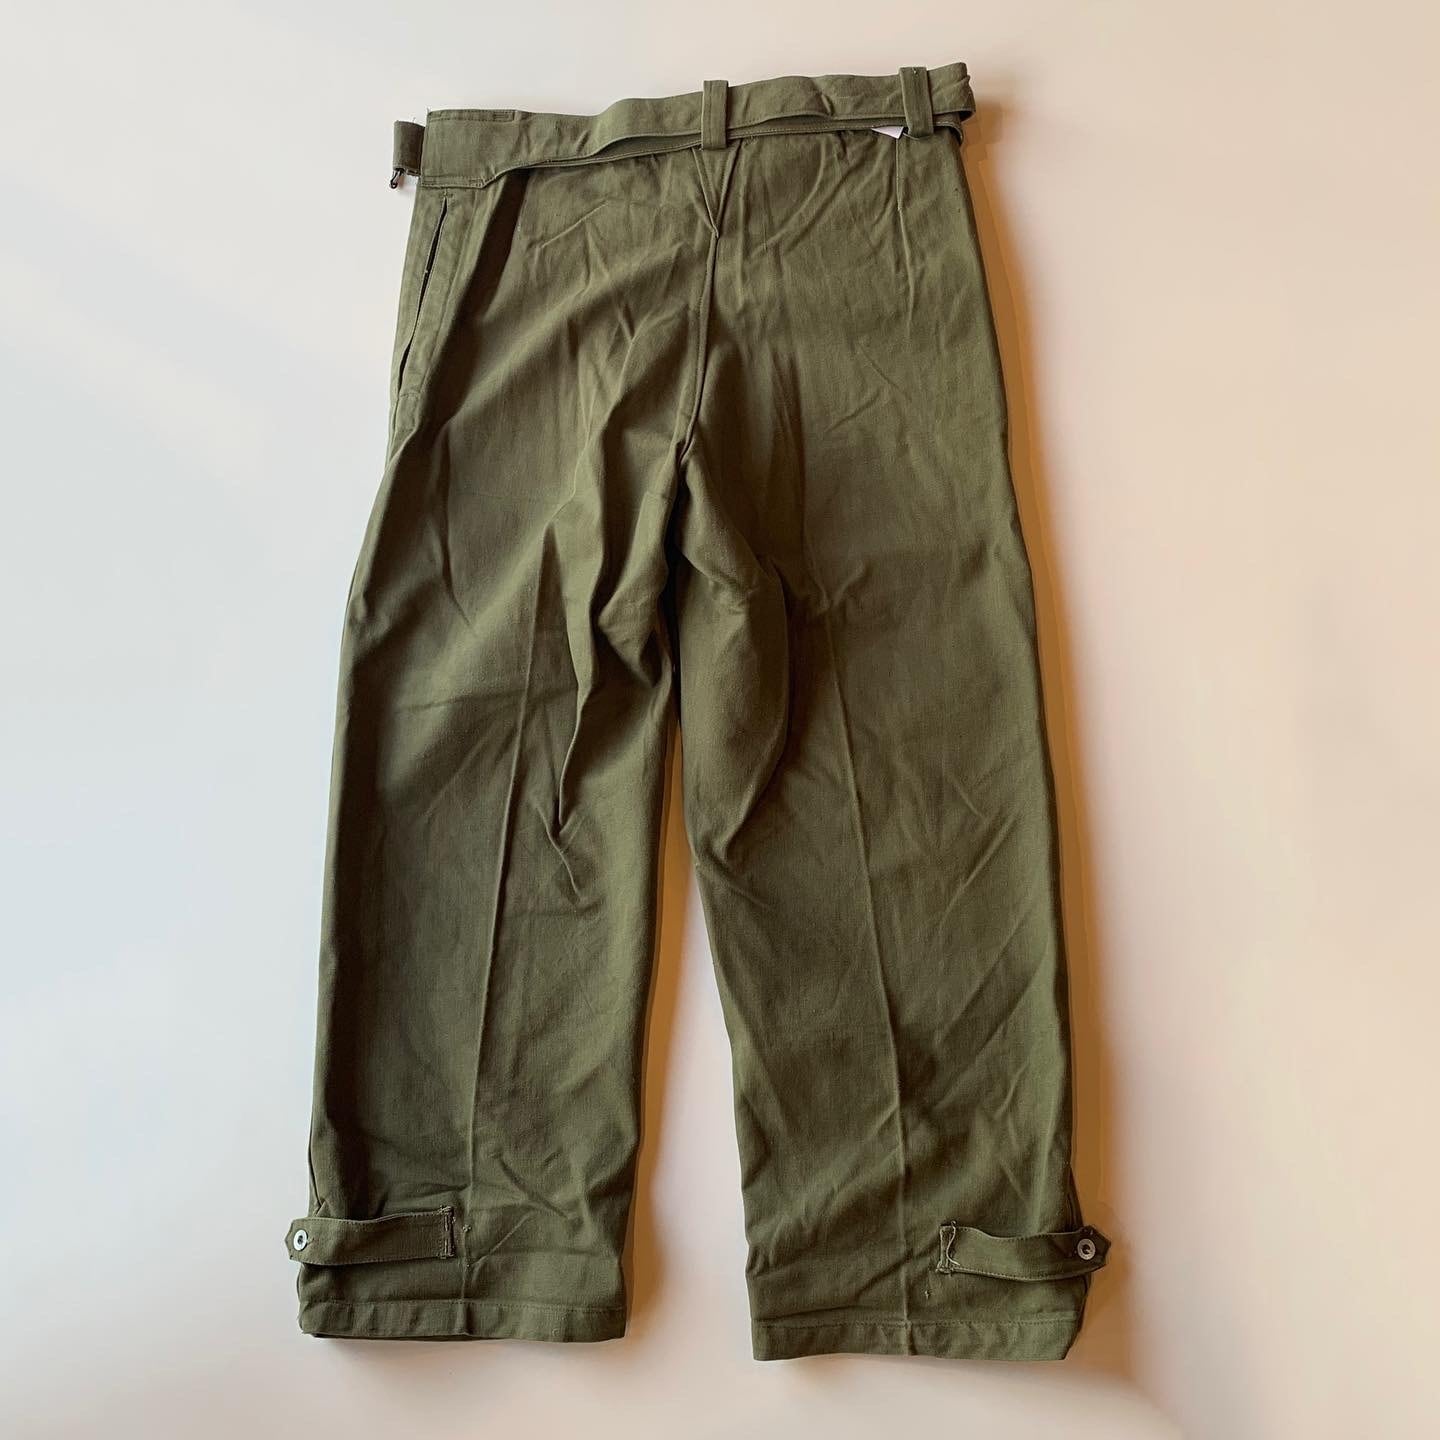 40-50s French ARMY motorcycle pants size:1 / デッドストック